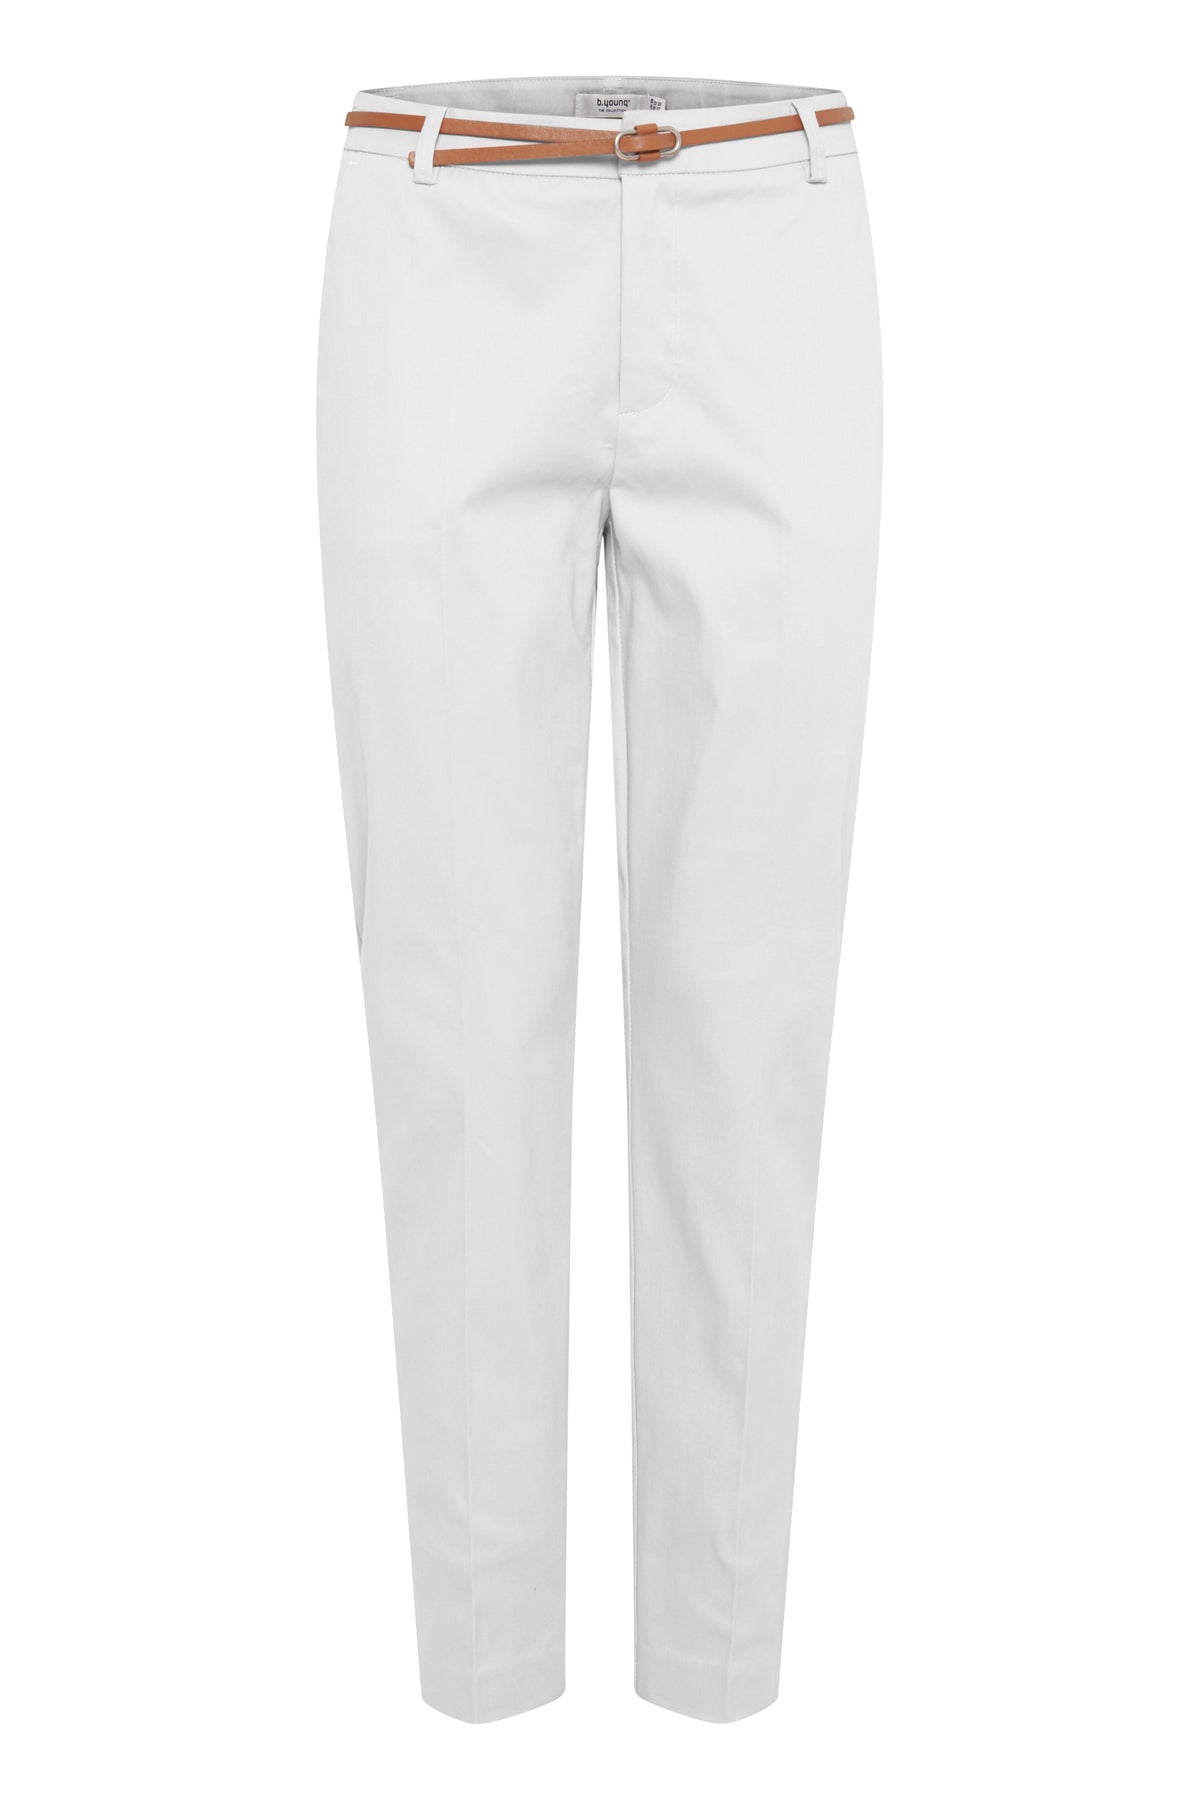 B.Young Days Off White Chino Trousers with Belt, 20803473